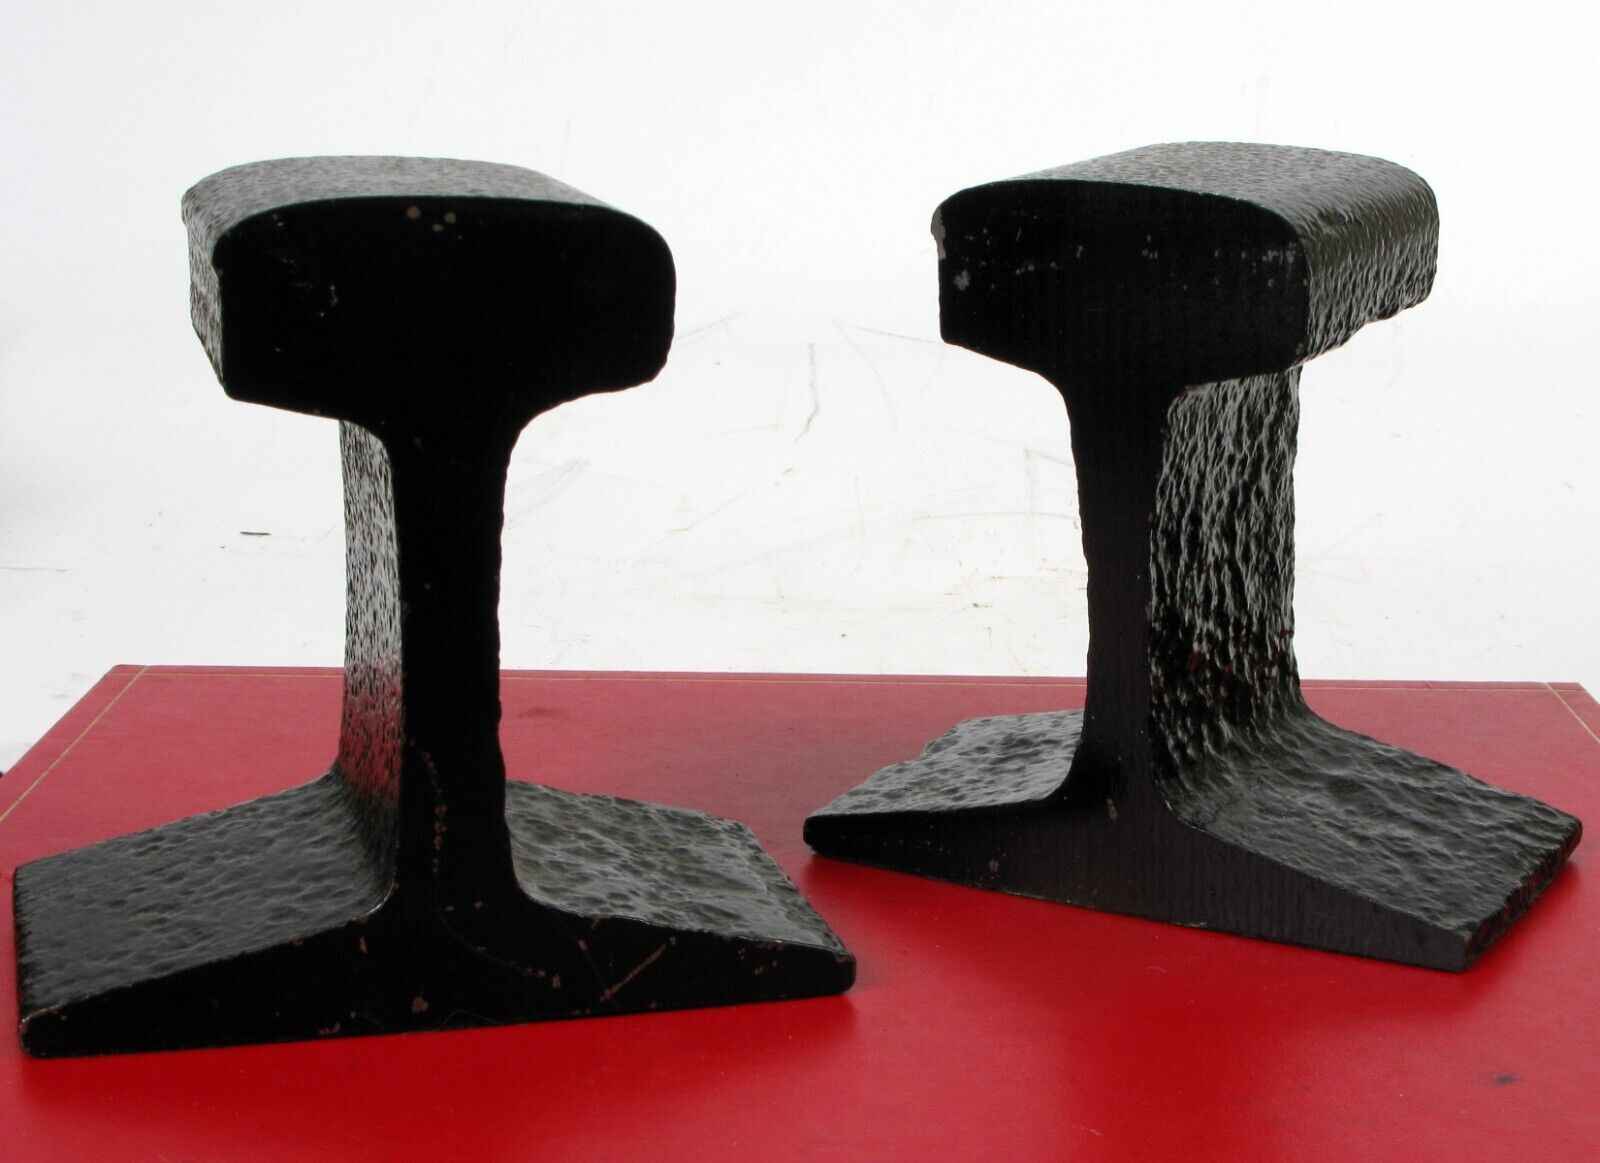 AWESOME ANTIQUE RAILROAD RAILWAY TRAIN TRACKS CUT INTO BOOKENDS 